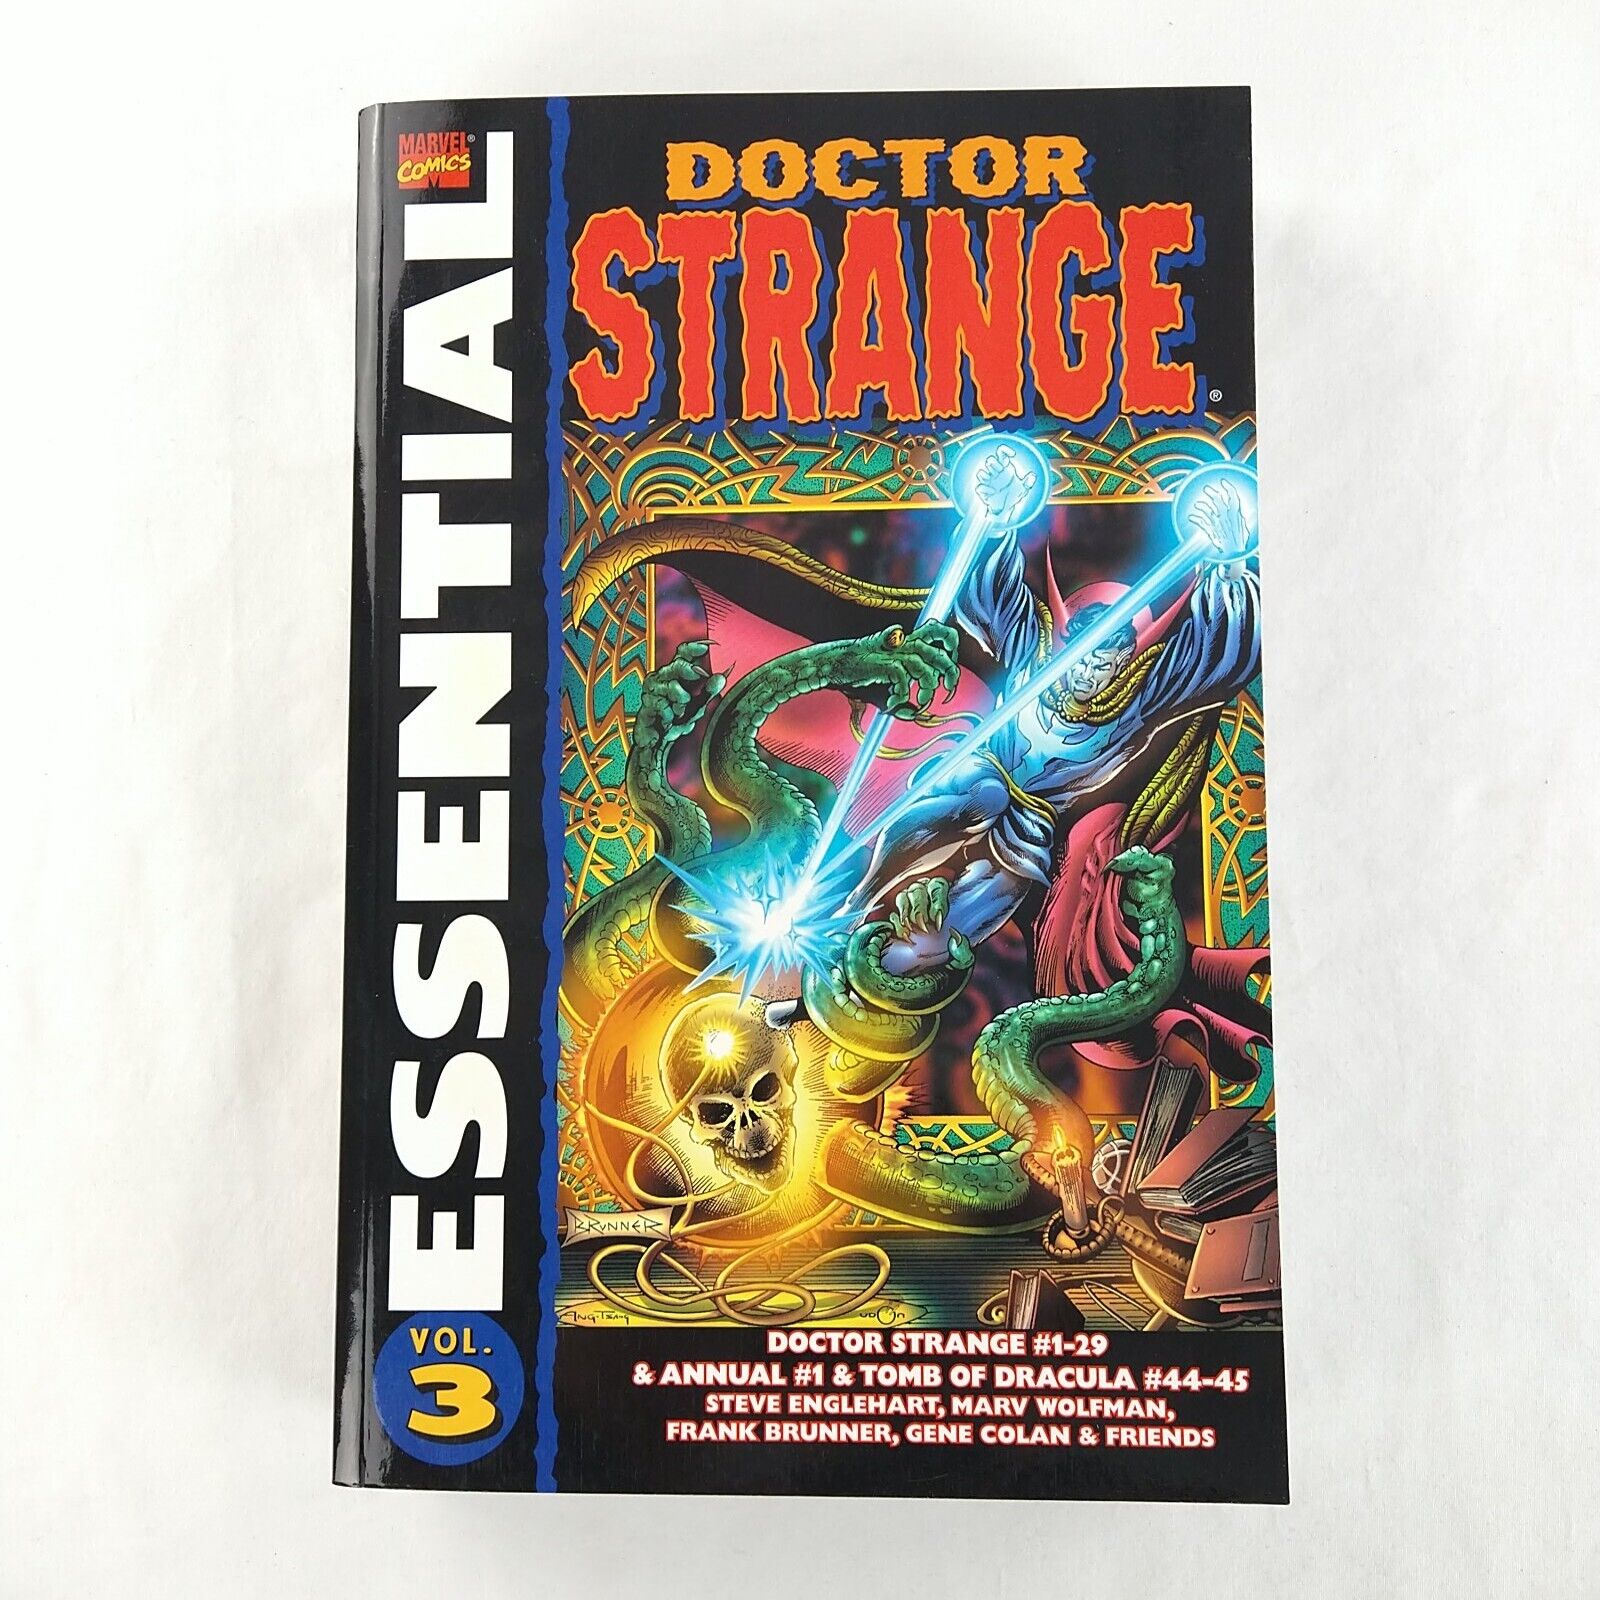 Essential Doctor Strange Volume #3 NM TPB Collects #1-29 + More (2007 Marvel)